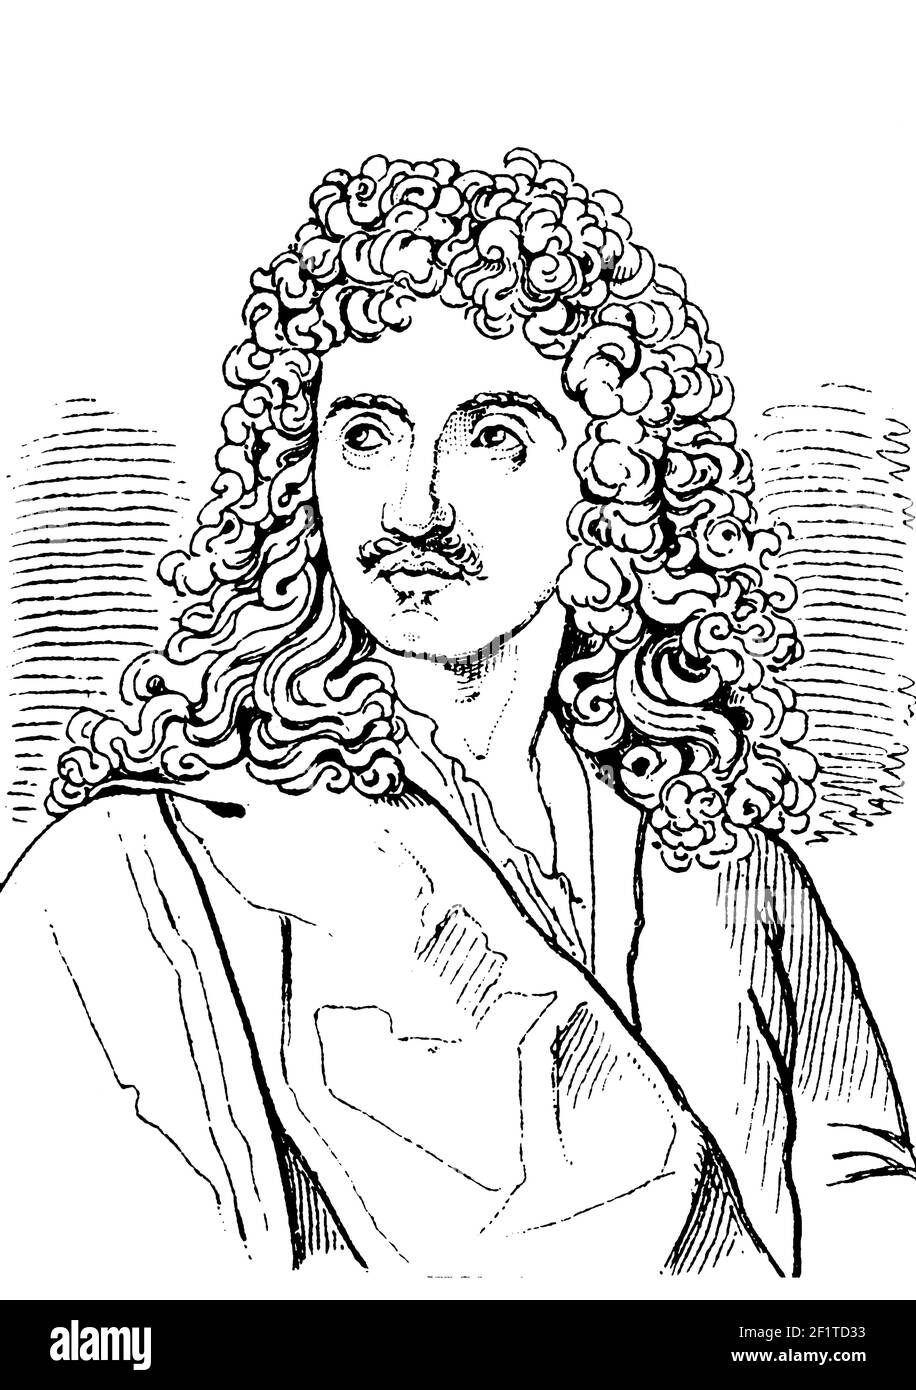 19th-century engraving of a portrait of Moliere, French playwright and actor who is considered one of the greatest masters of comedy in Western litera Stock Photo